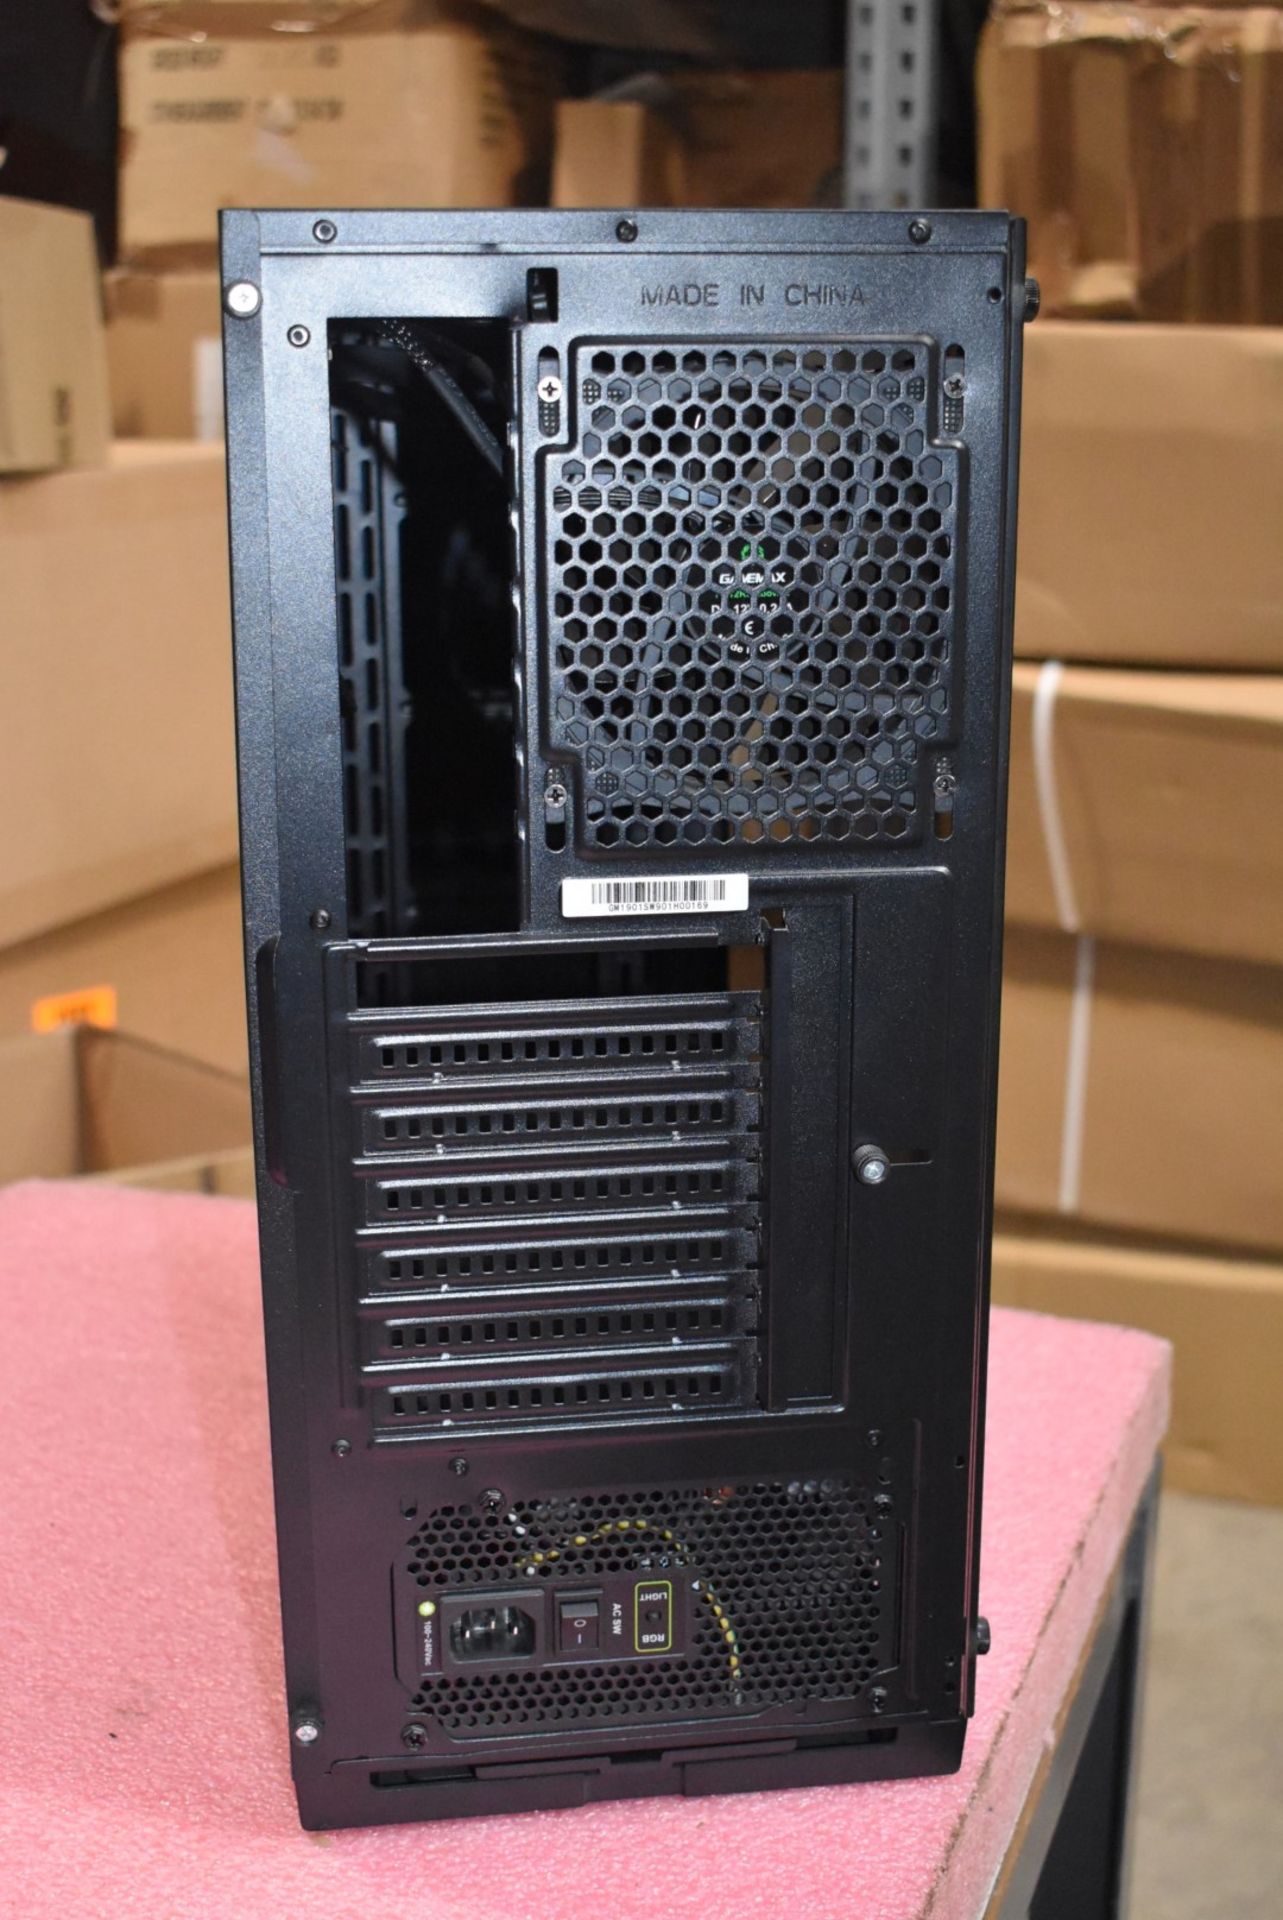 1 x Gamemax ATX Case Featuring Glass Side Panel and 550w PSU - Unused Without Original Packaging - Image 5 of 9